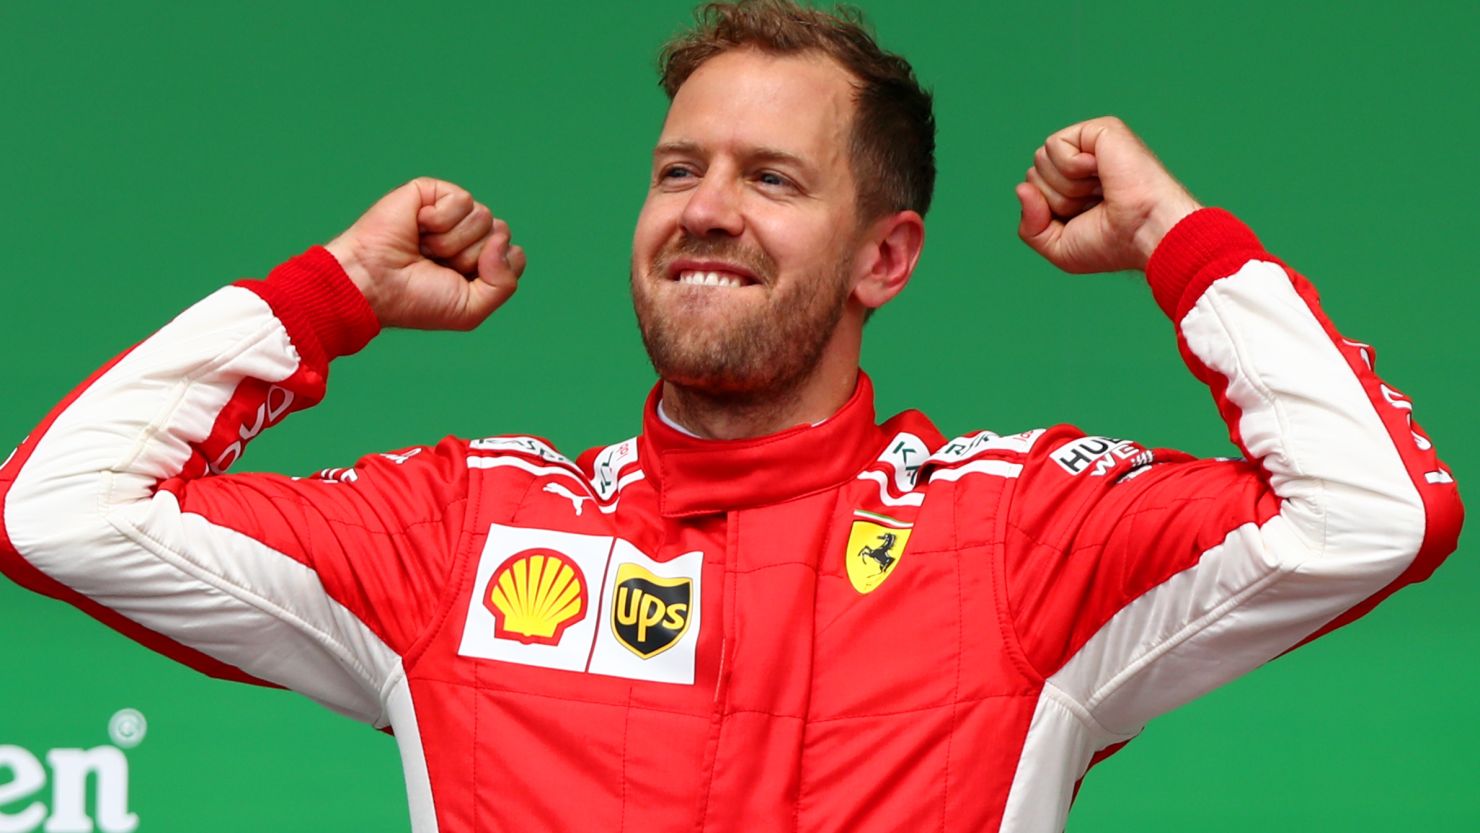 Sebastian Vettel celebrates his victory in the Canadian GP in Montreal to take the title lead.